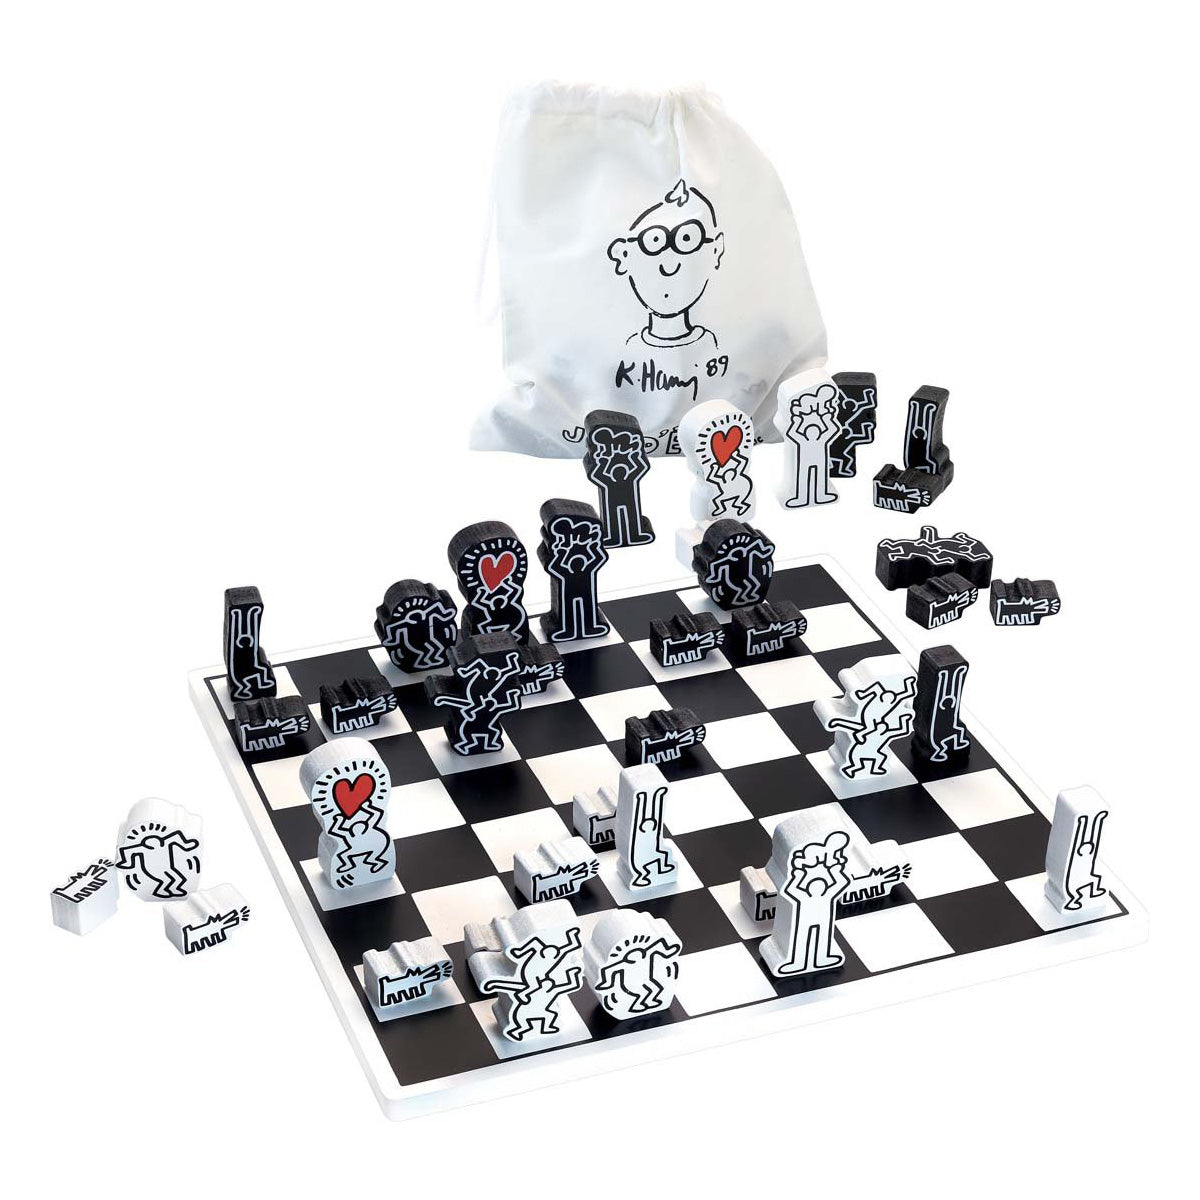 The Keith Haring Chess Set displayed with its pieces and white fabric bag.